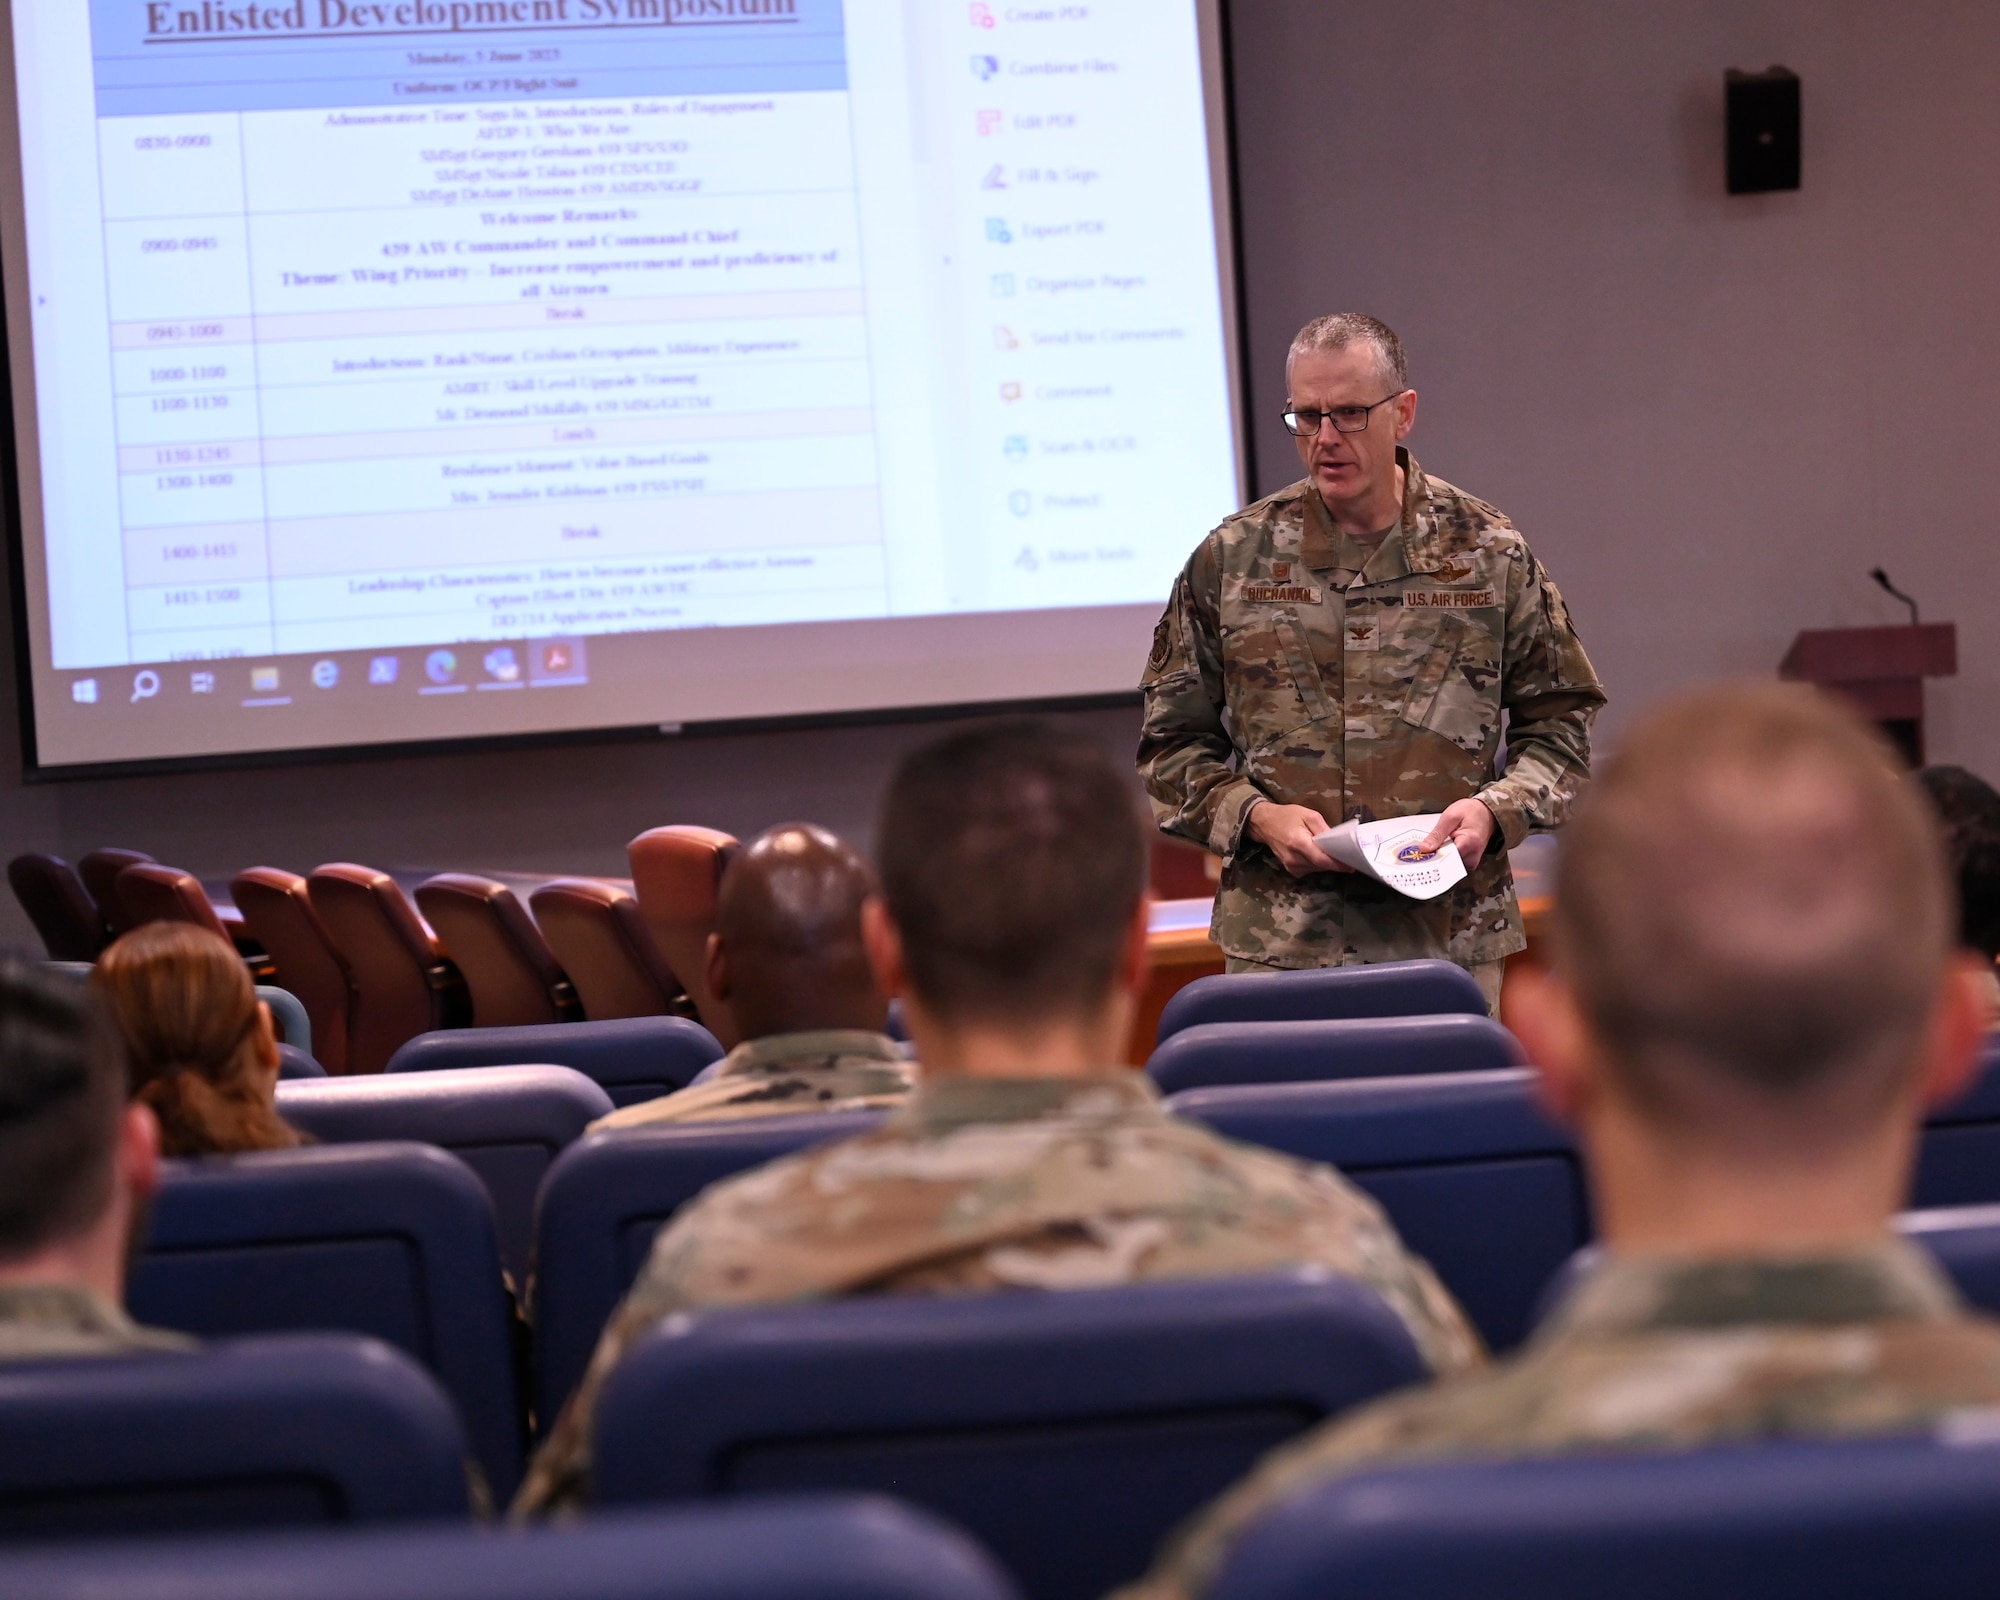 Annual Enlisted event focuses on Development